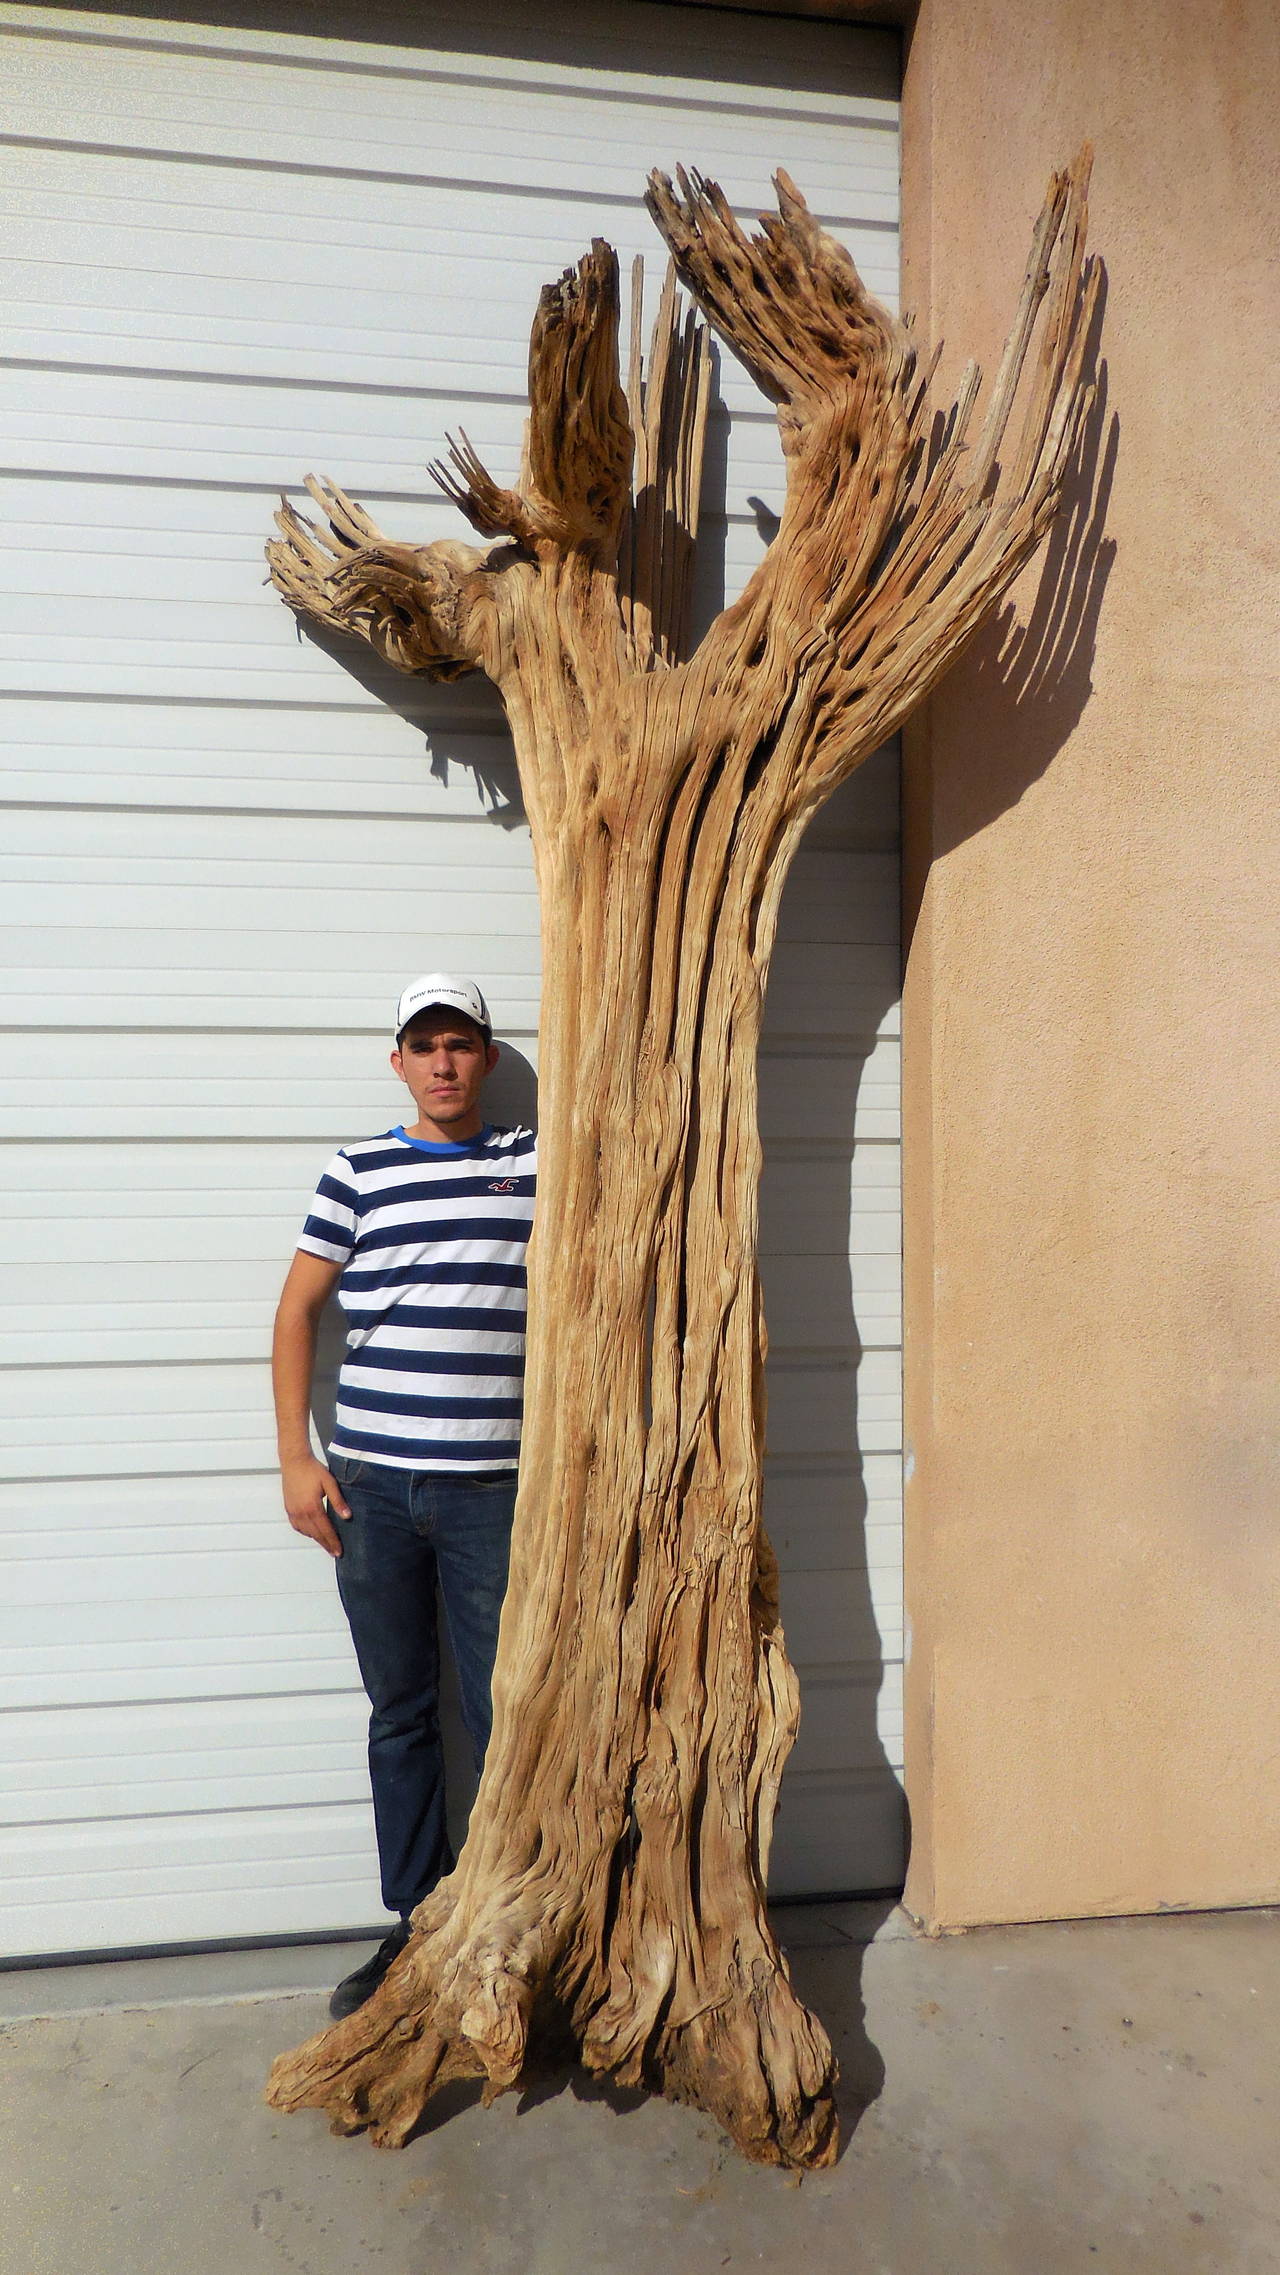 A monumental hundred year old cactus skeleton. About 12' tall and 6' wide, this spectacular dead cactus is completely dried out and critter free. This has been power washed as well. The natural sculptural presence of this piece is amazing. As shown,